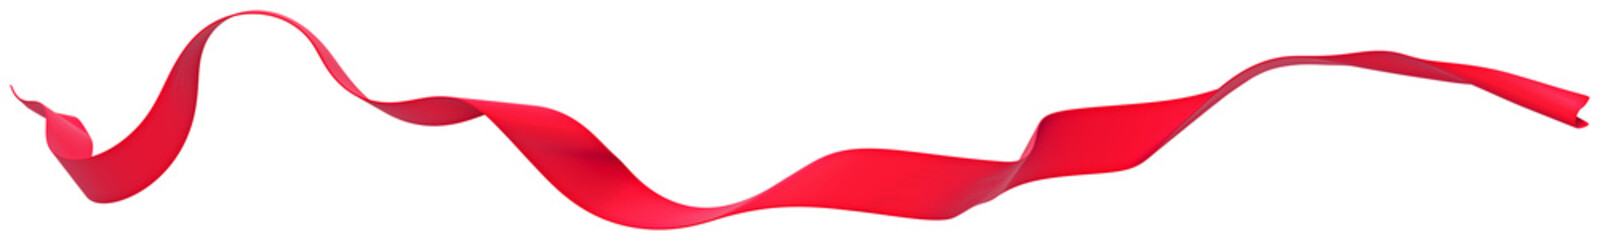 Smooth red ribbon on isolated background. 3d render.